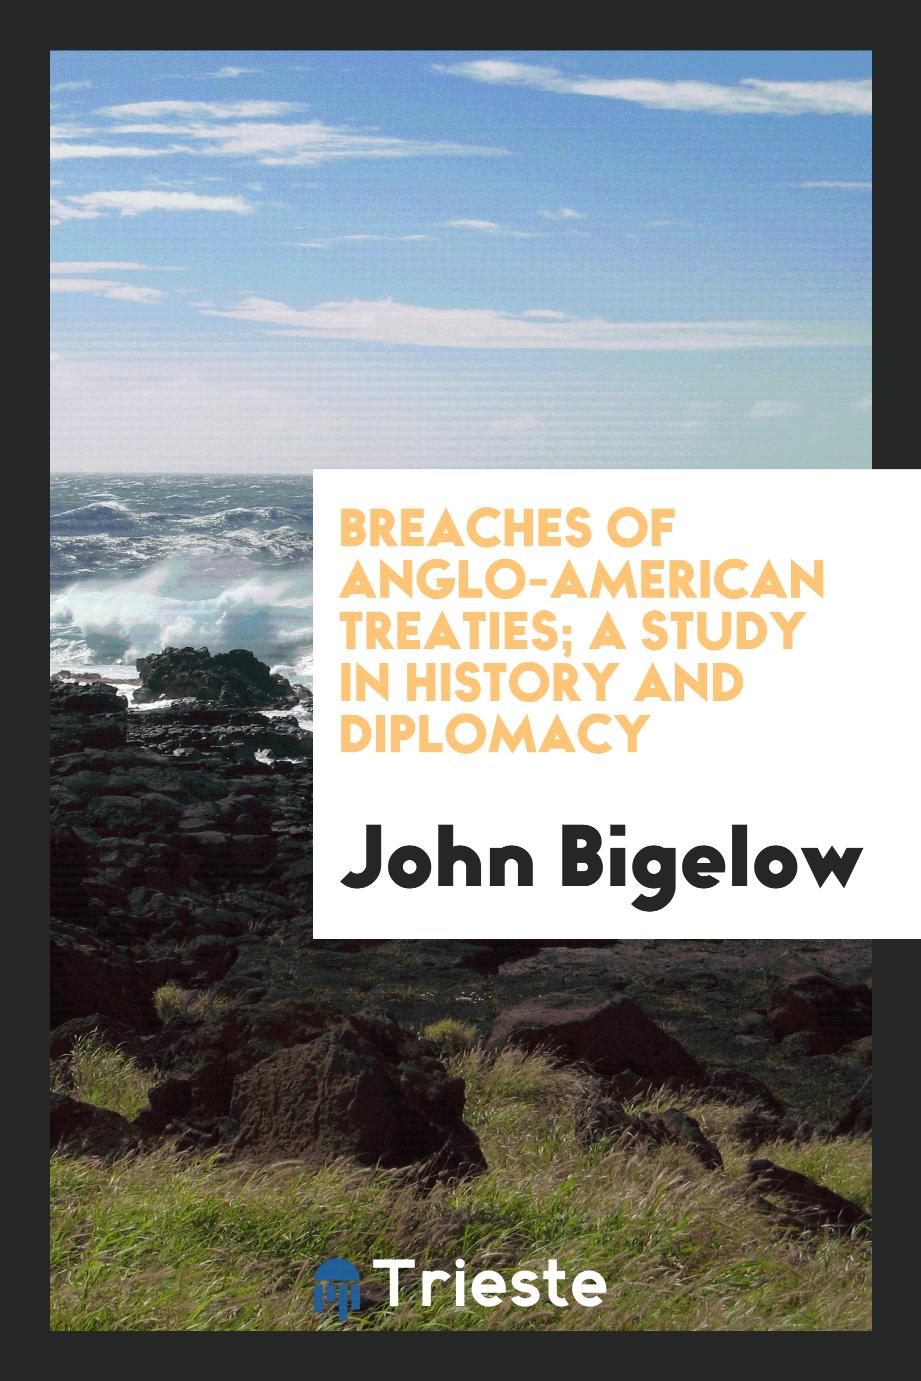 Breaches of Anglo-American treaties; a study in history and diplomacy